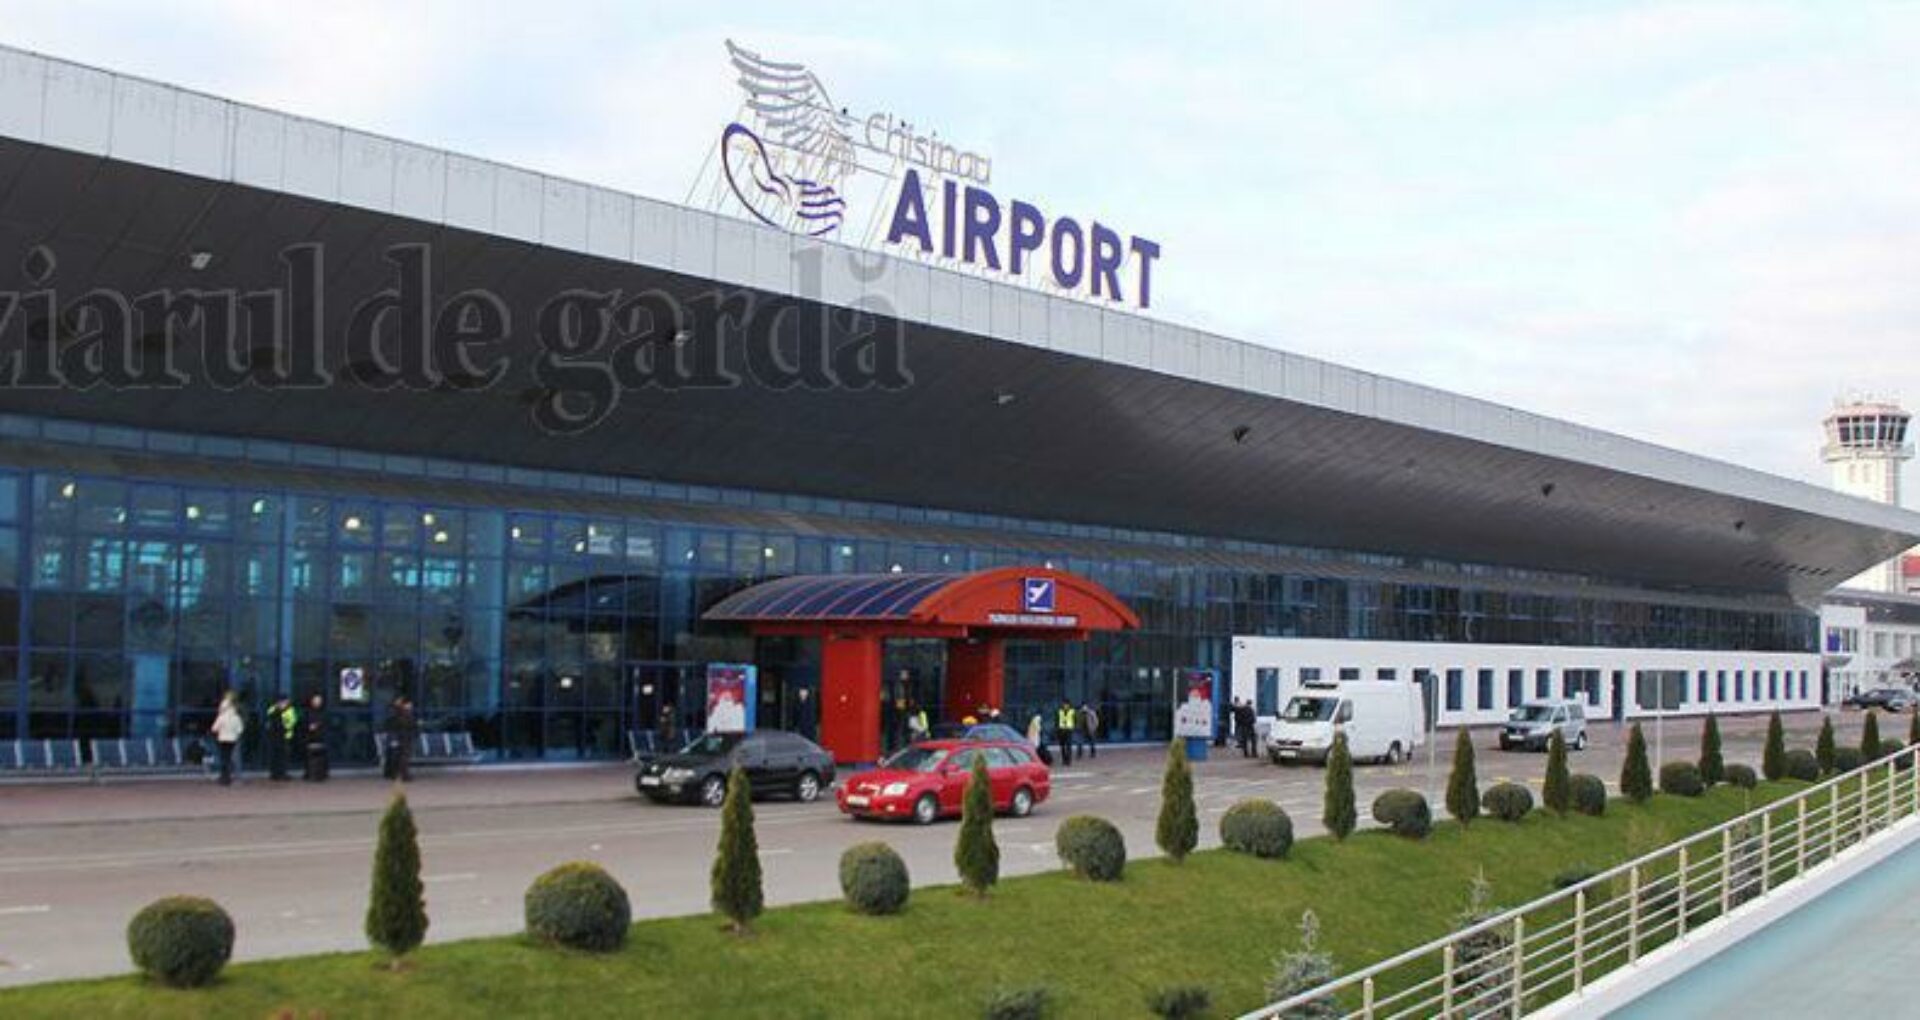 Guernsey-based Company Takes Over Chișinău Airport